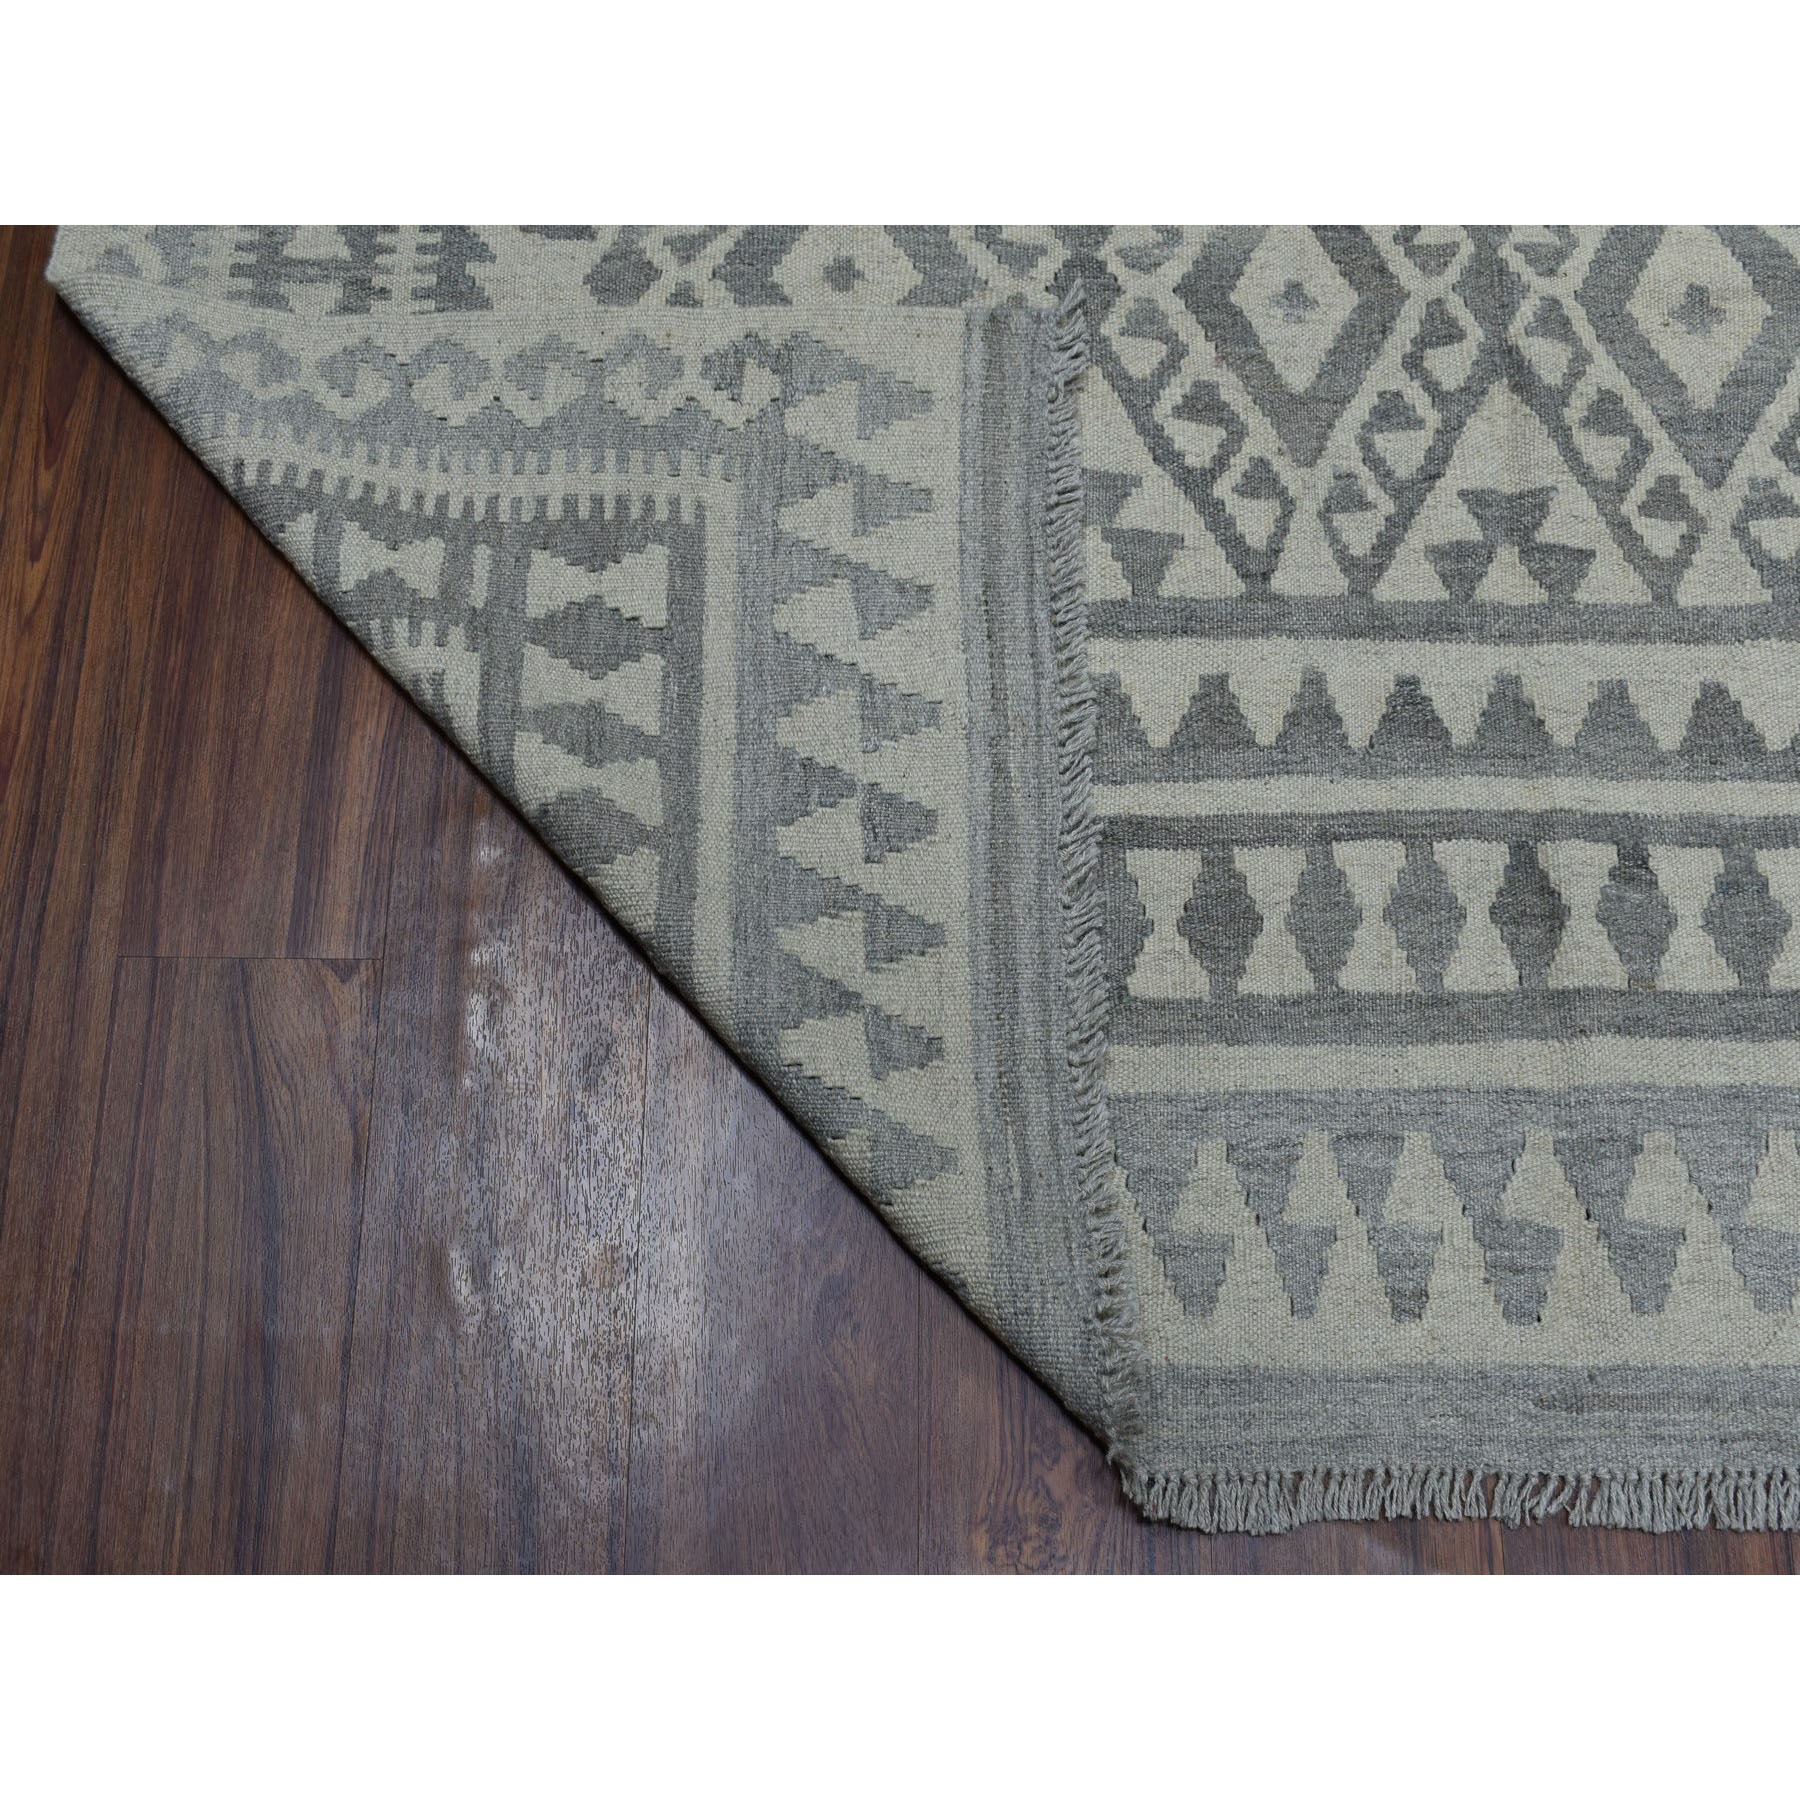 6-x8- Afghan Kilim Undyed Natural Wool Flat Wave Hand Woven Oriental Rug 